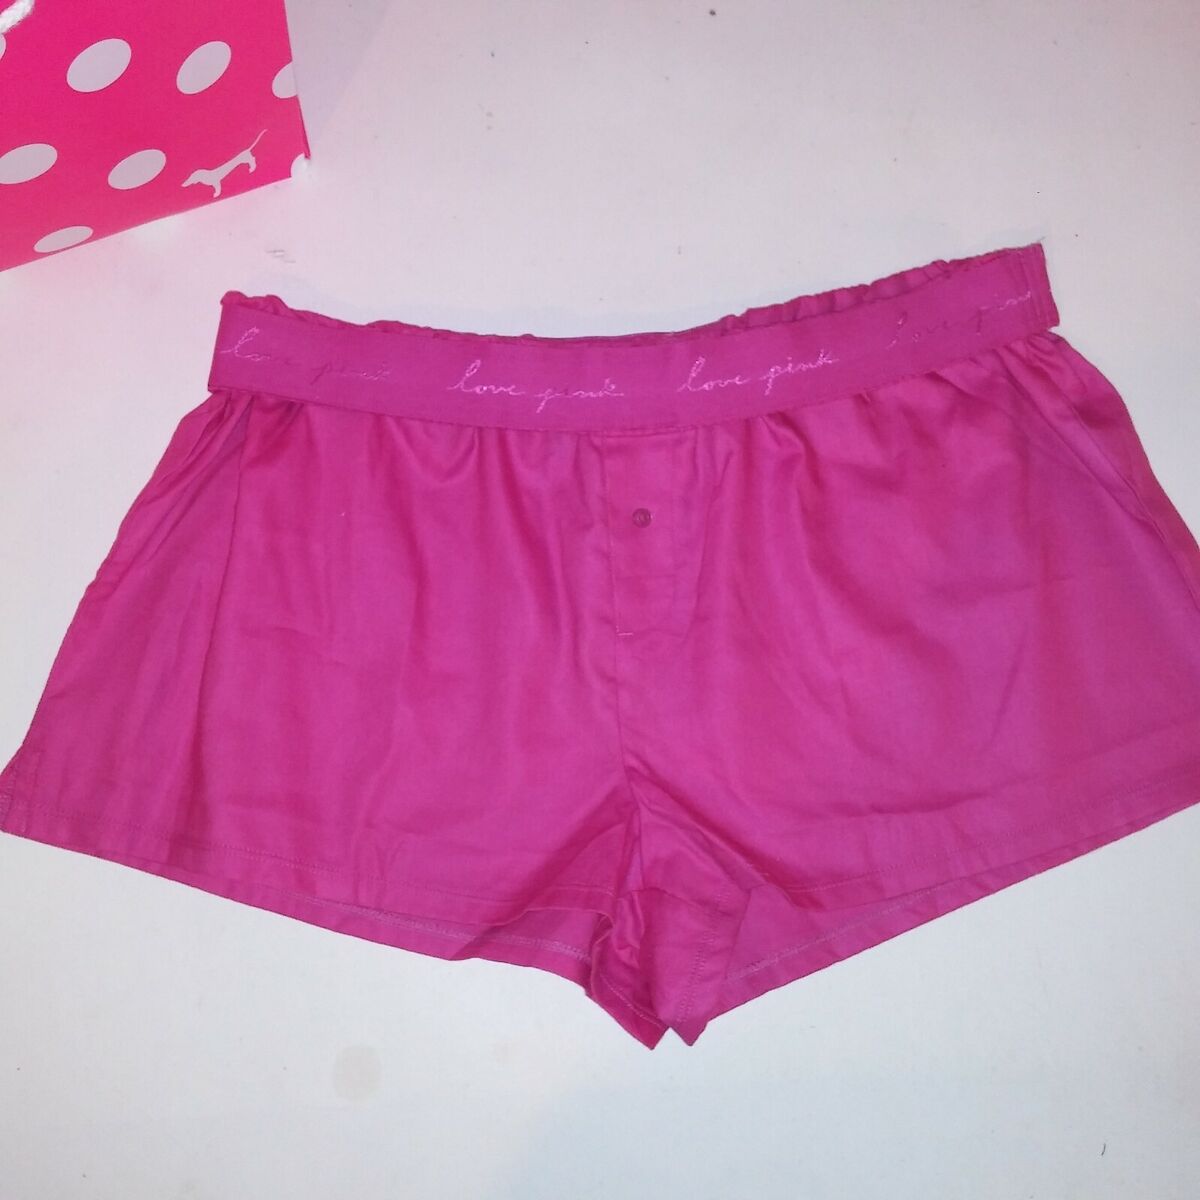 PINK - Victoria's Secret Victoria's Secret Pink Boxer Sleep Shorts Size M -  $15 (66% Off Retail) - From Morgan